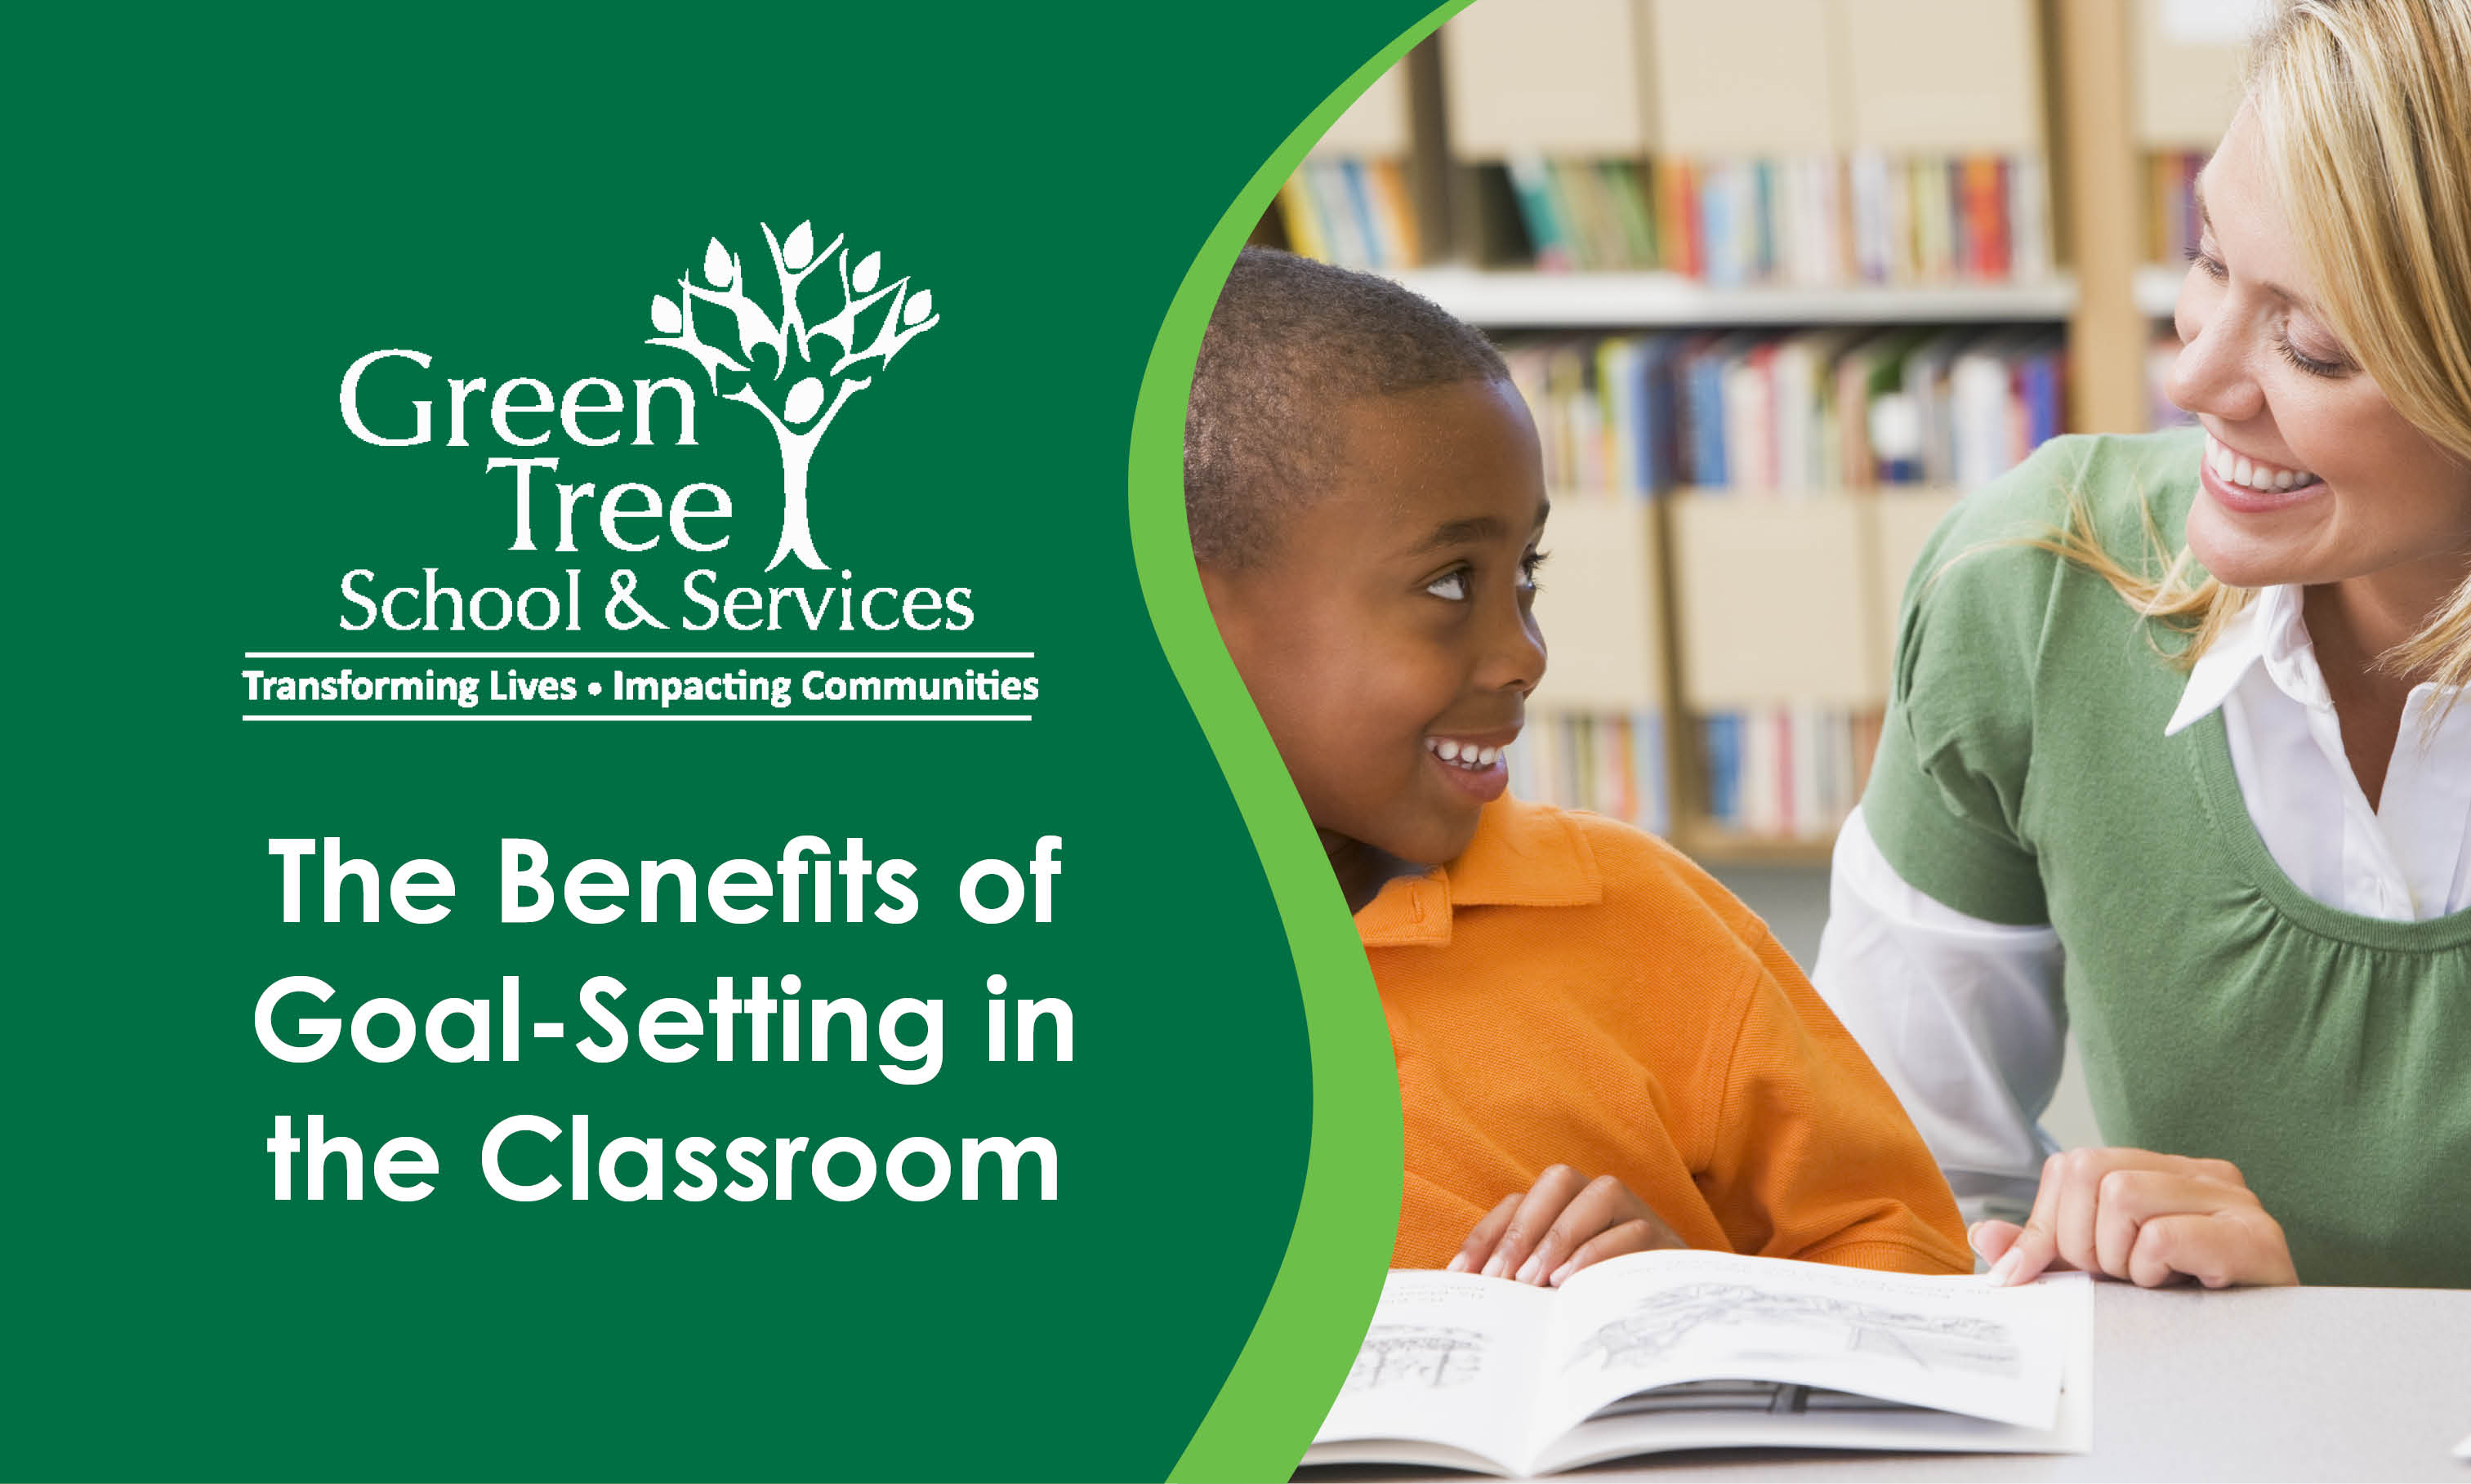 The Benefits of Goal-Setting in the classroom